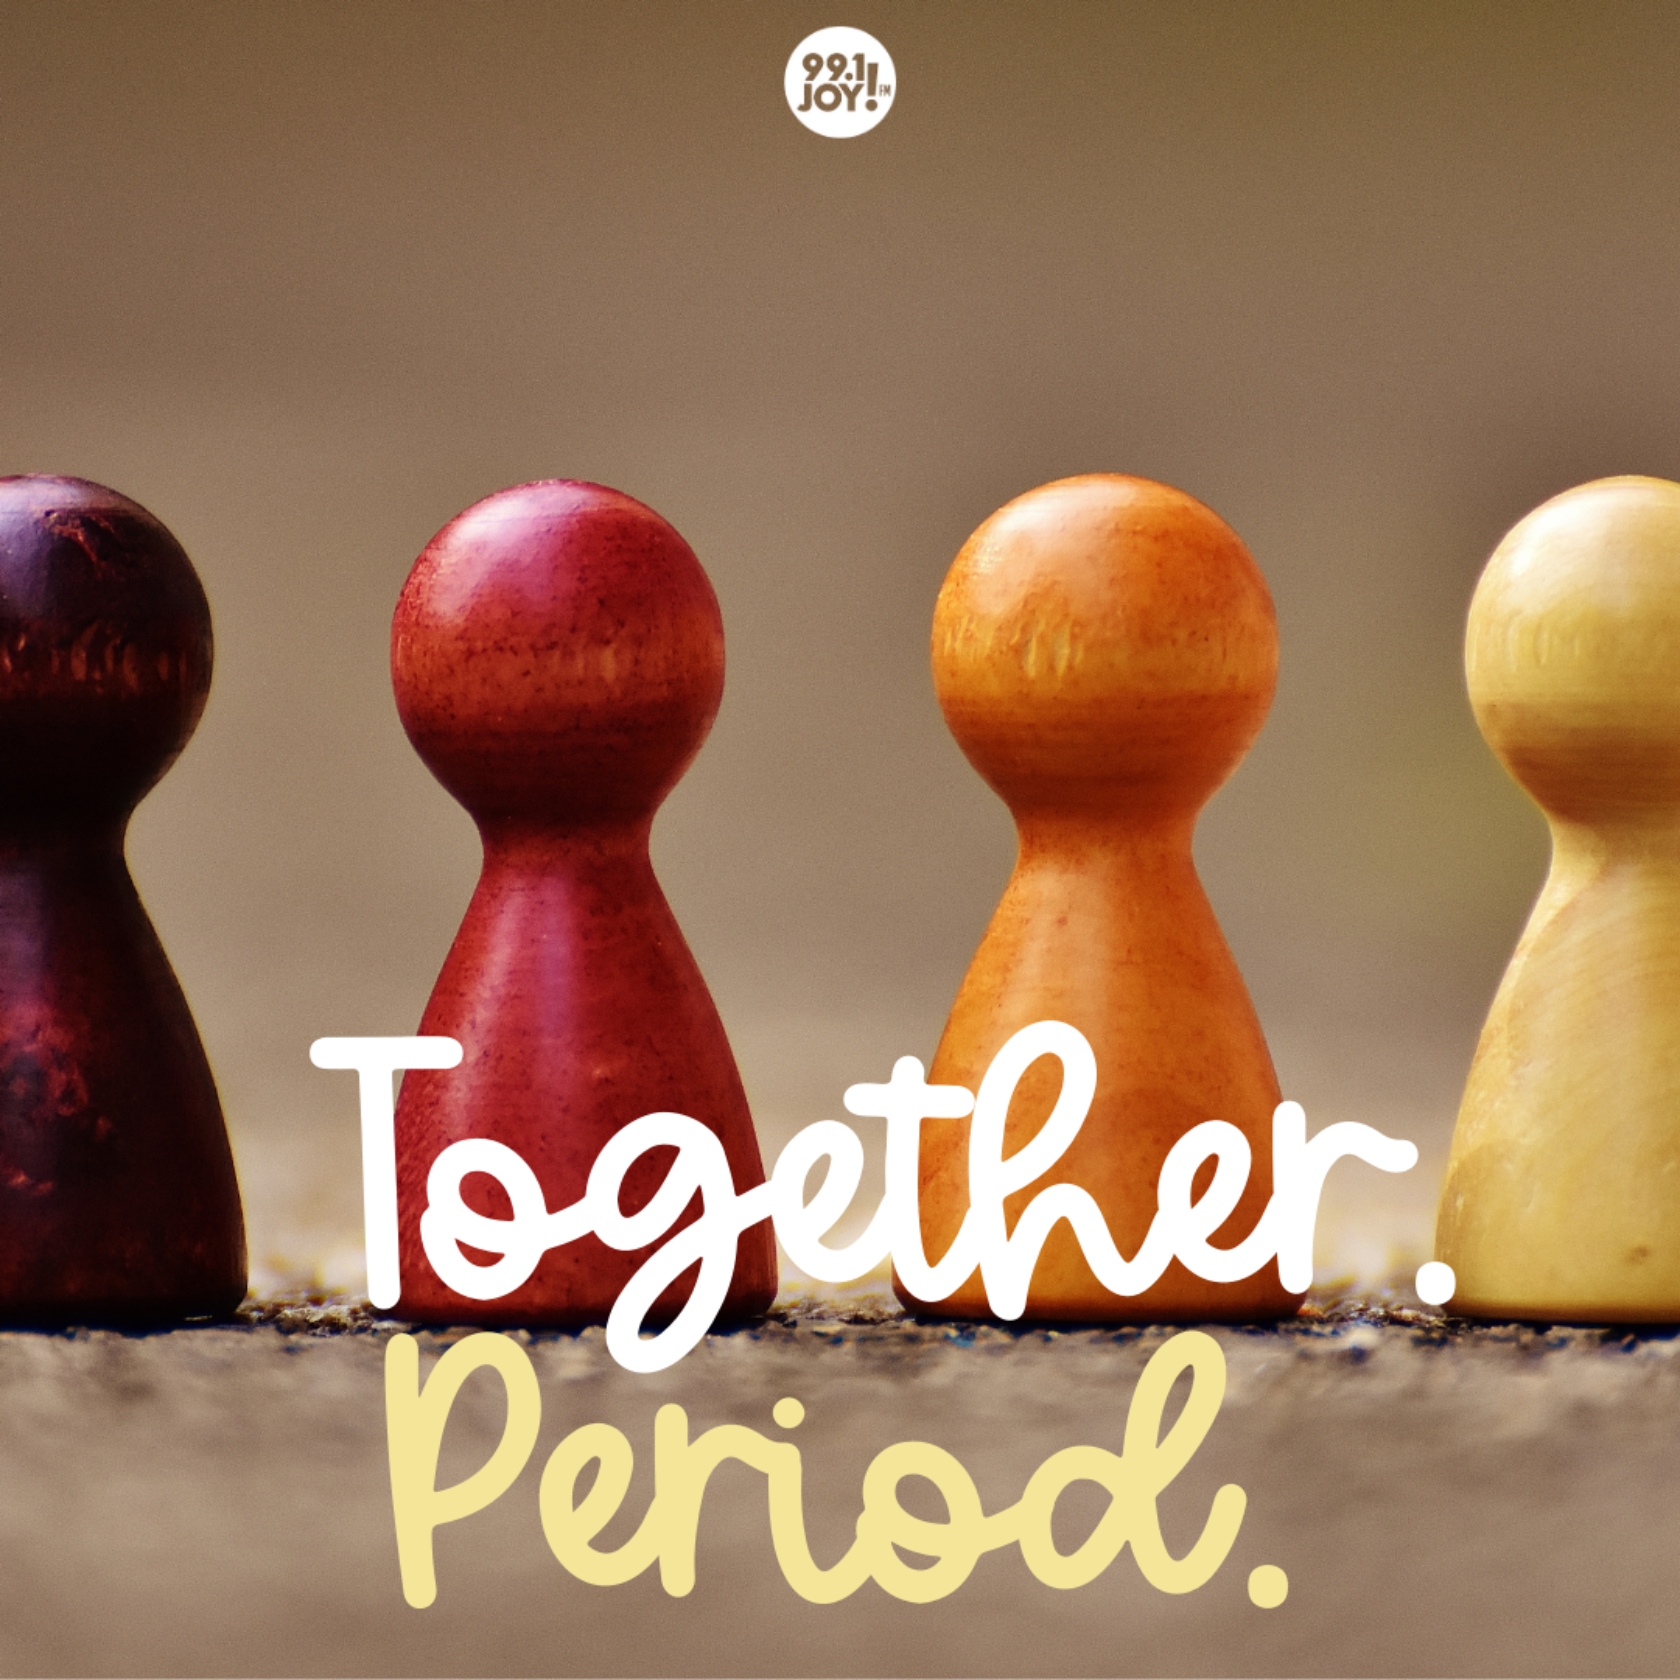 Together. Period.